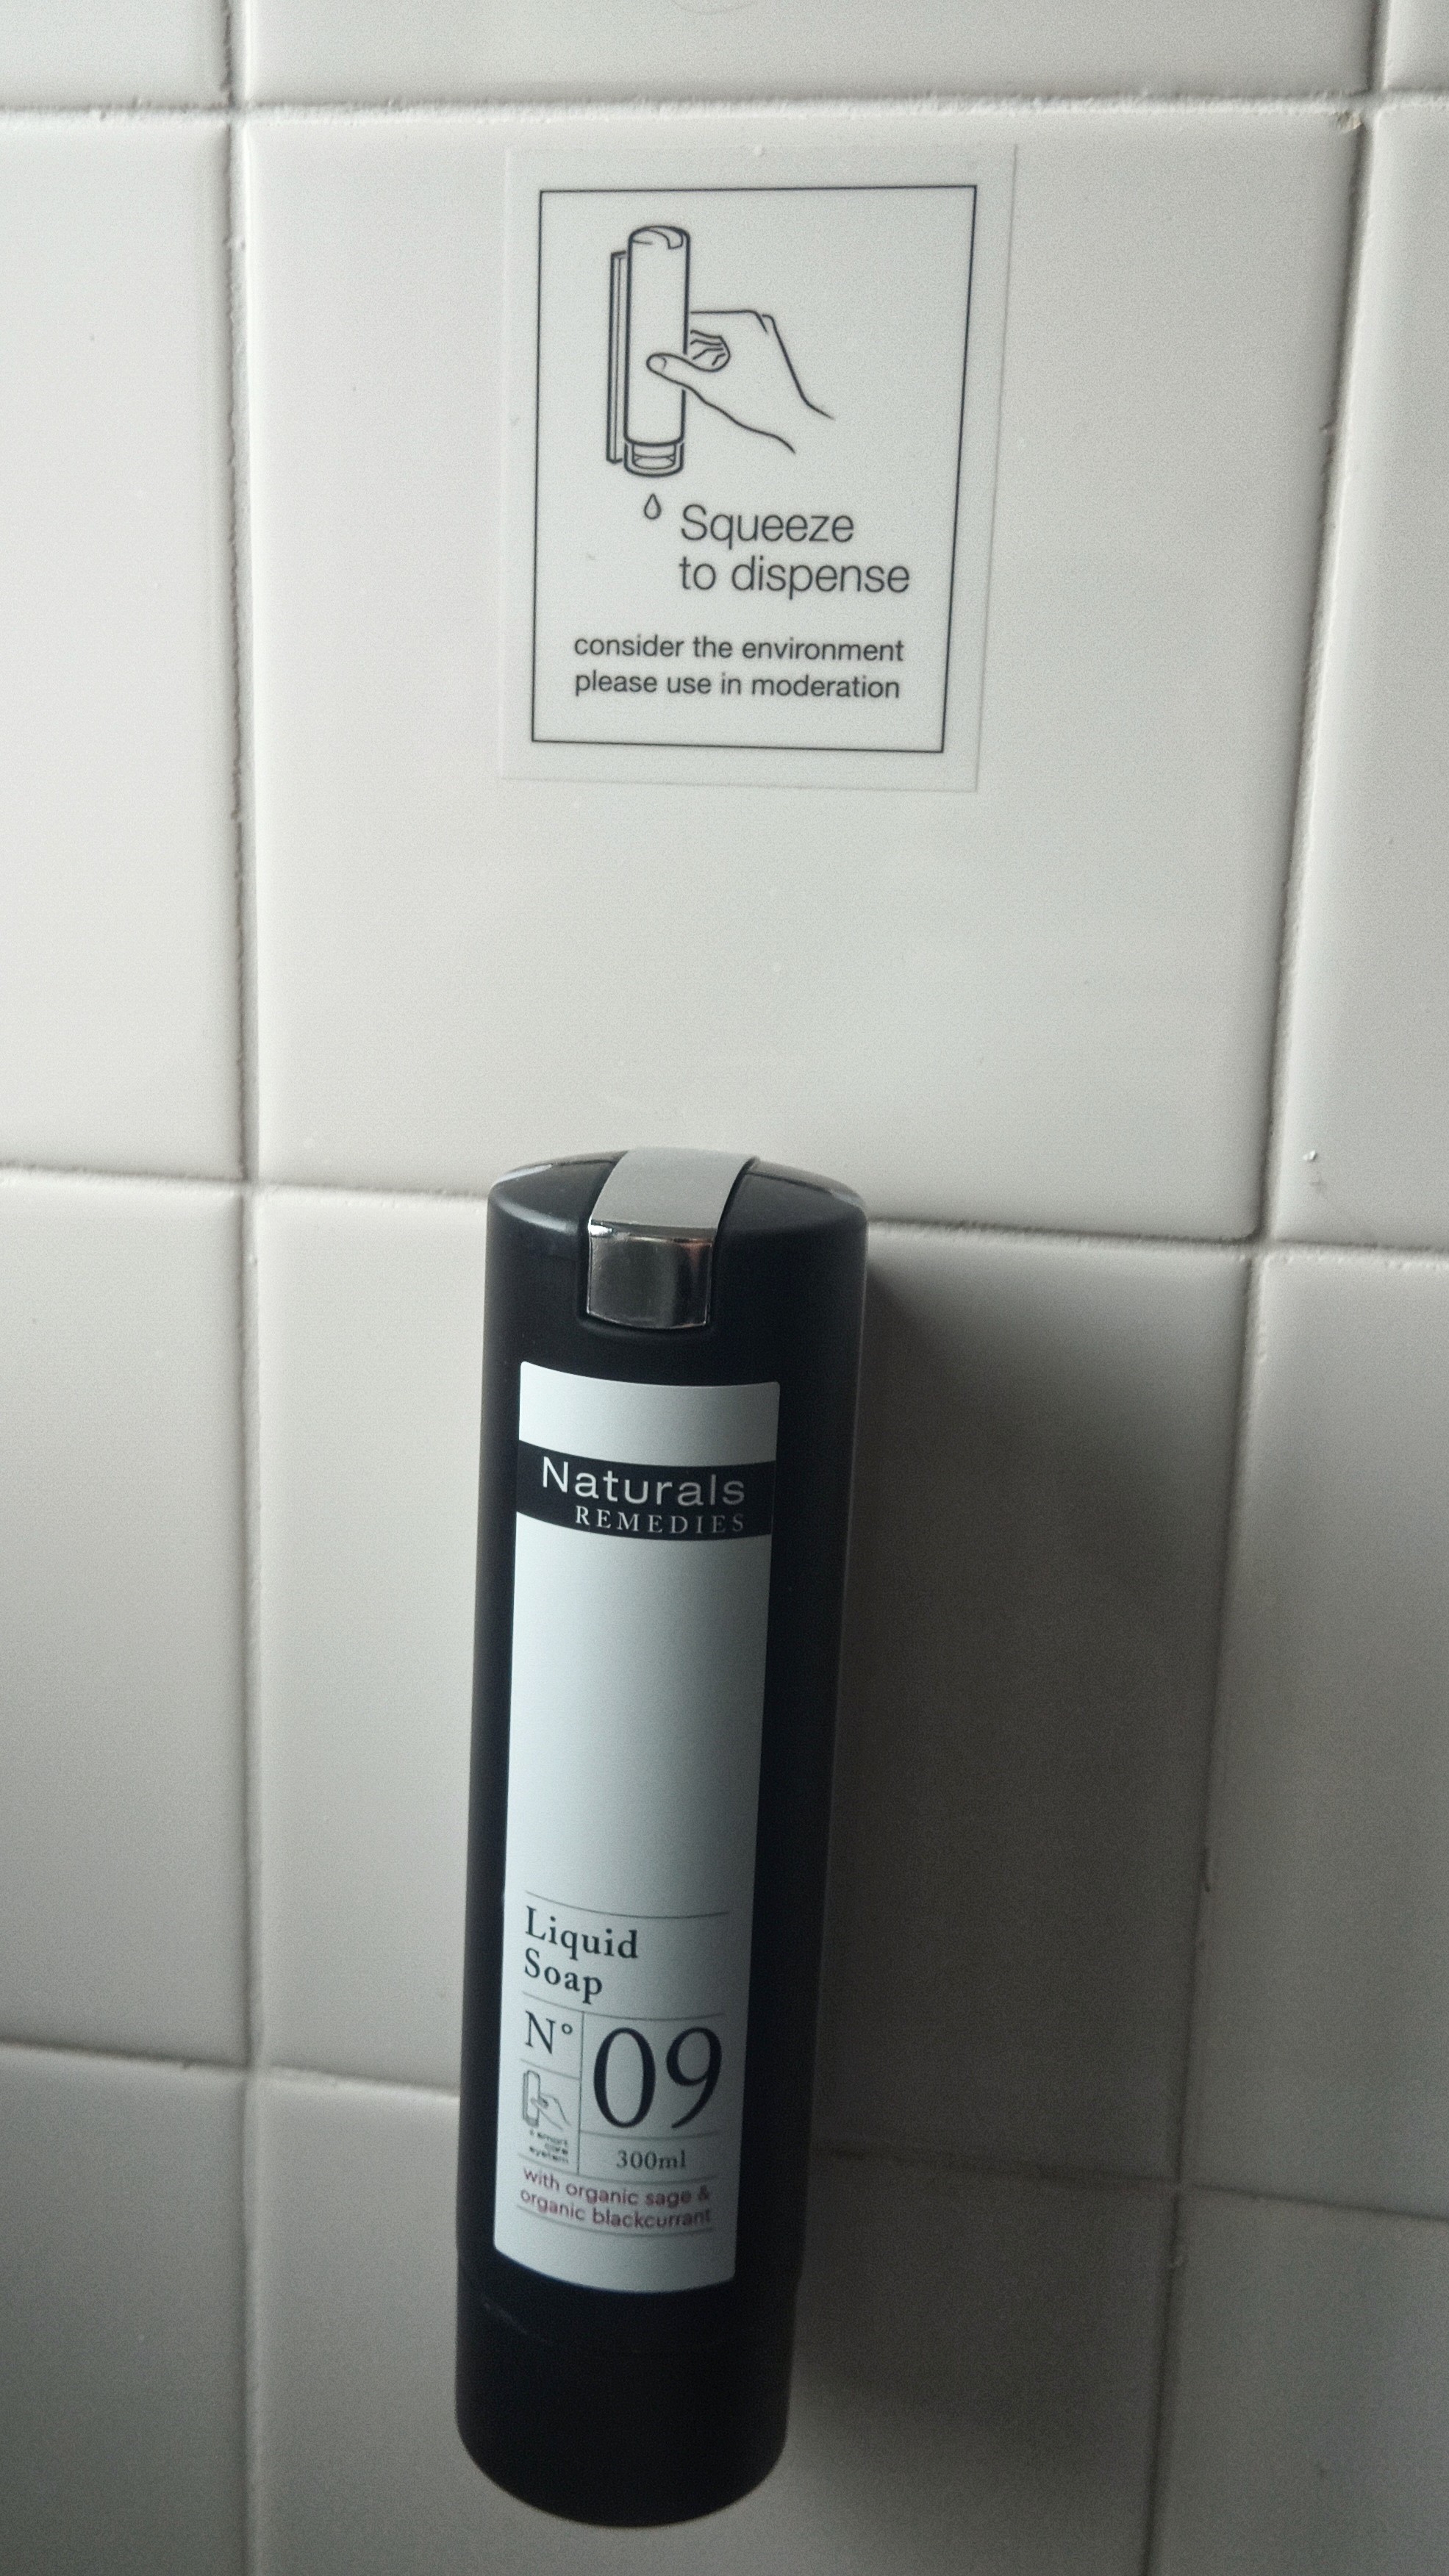 cylinder-shaped liquid hand soap dispenser with sign above saying "squeeze to disperse".